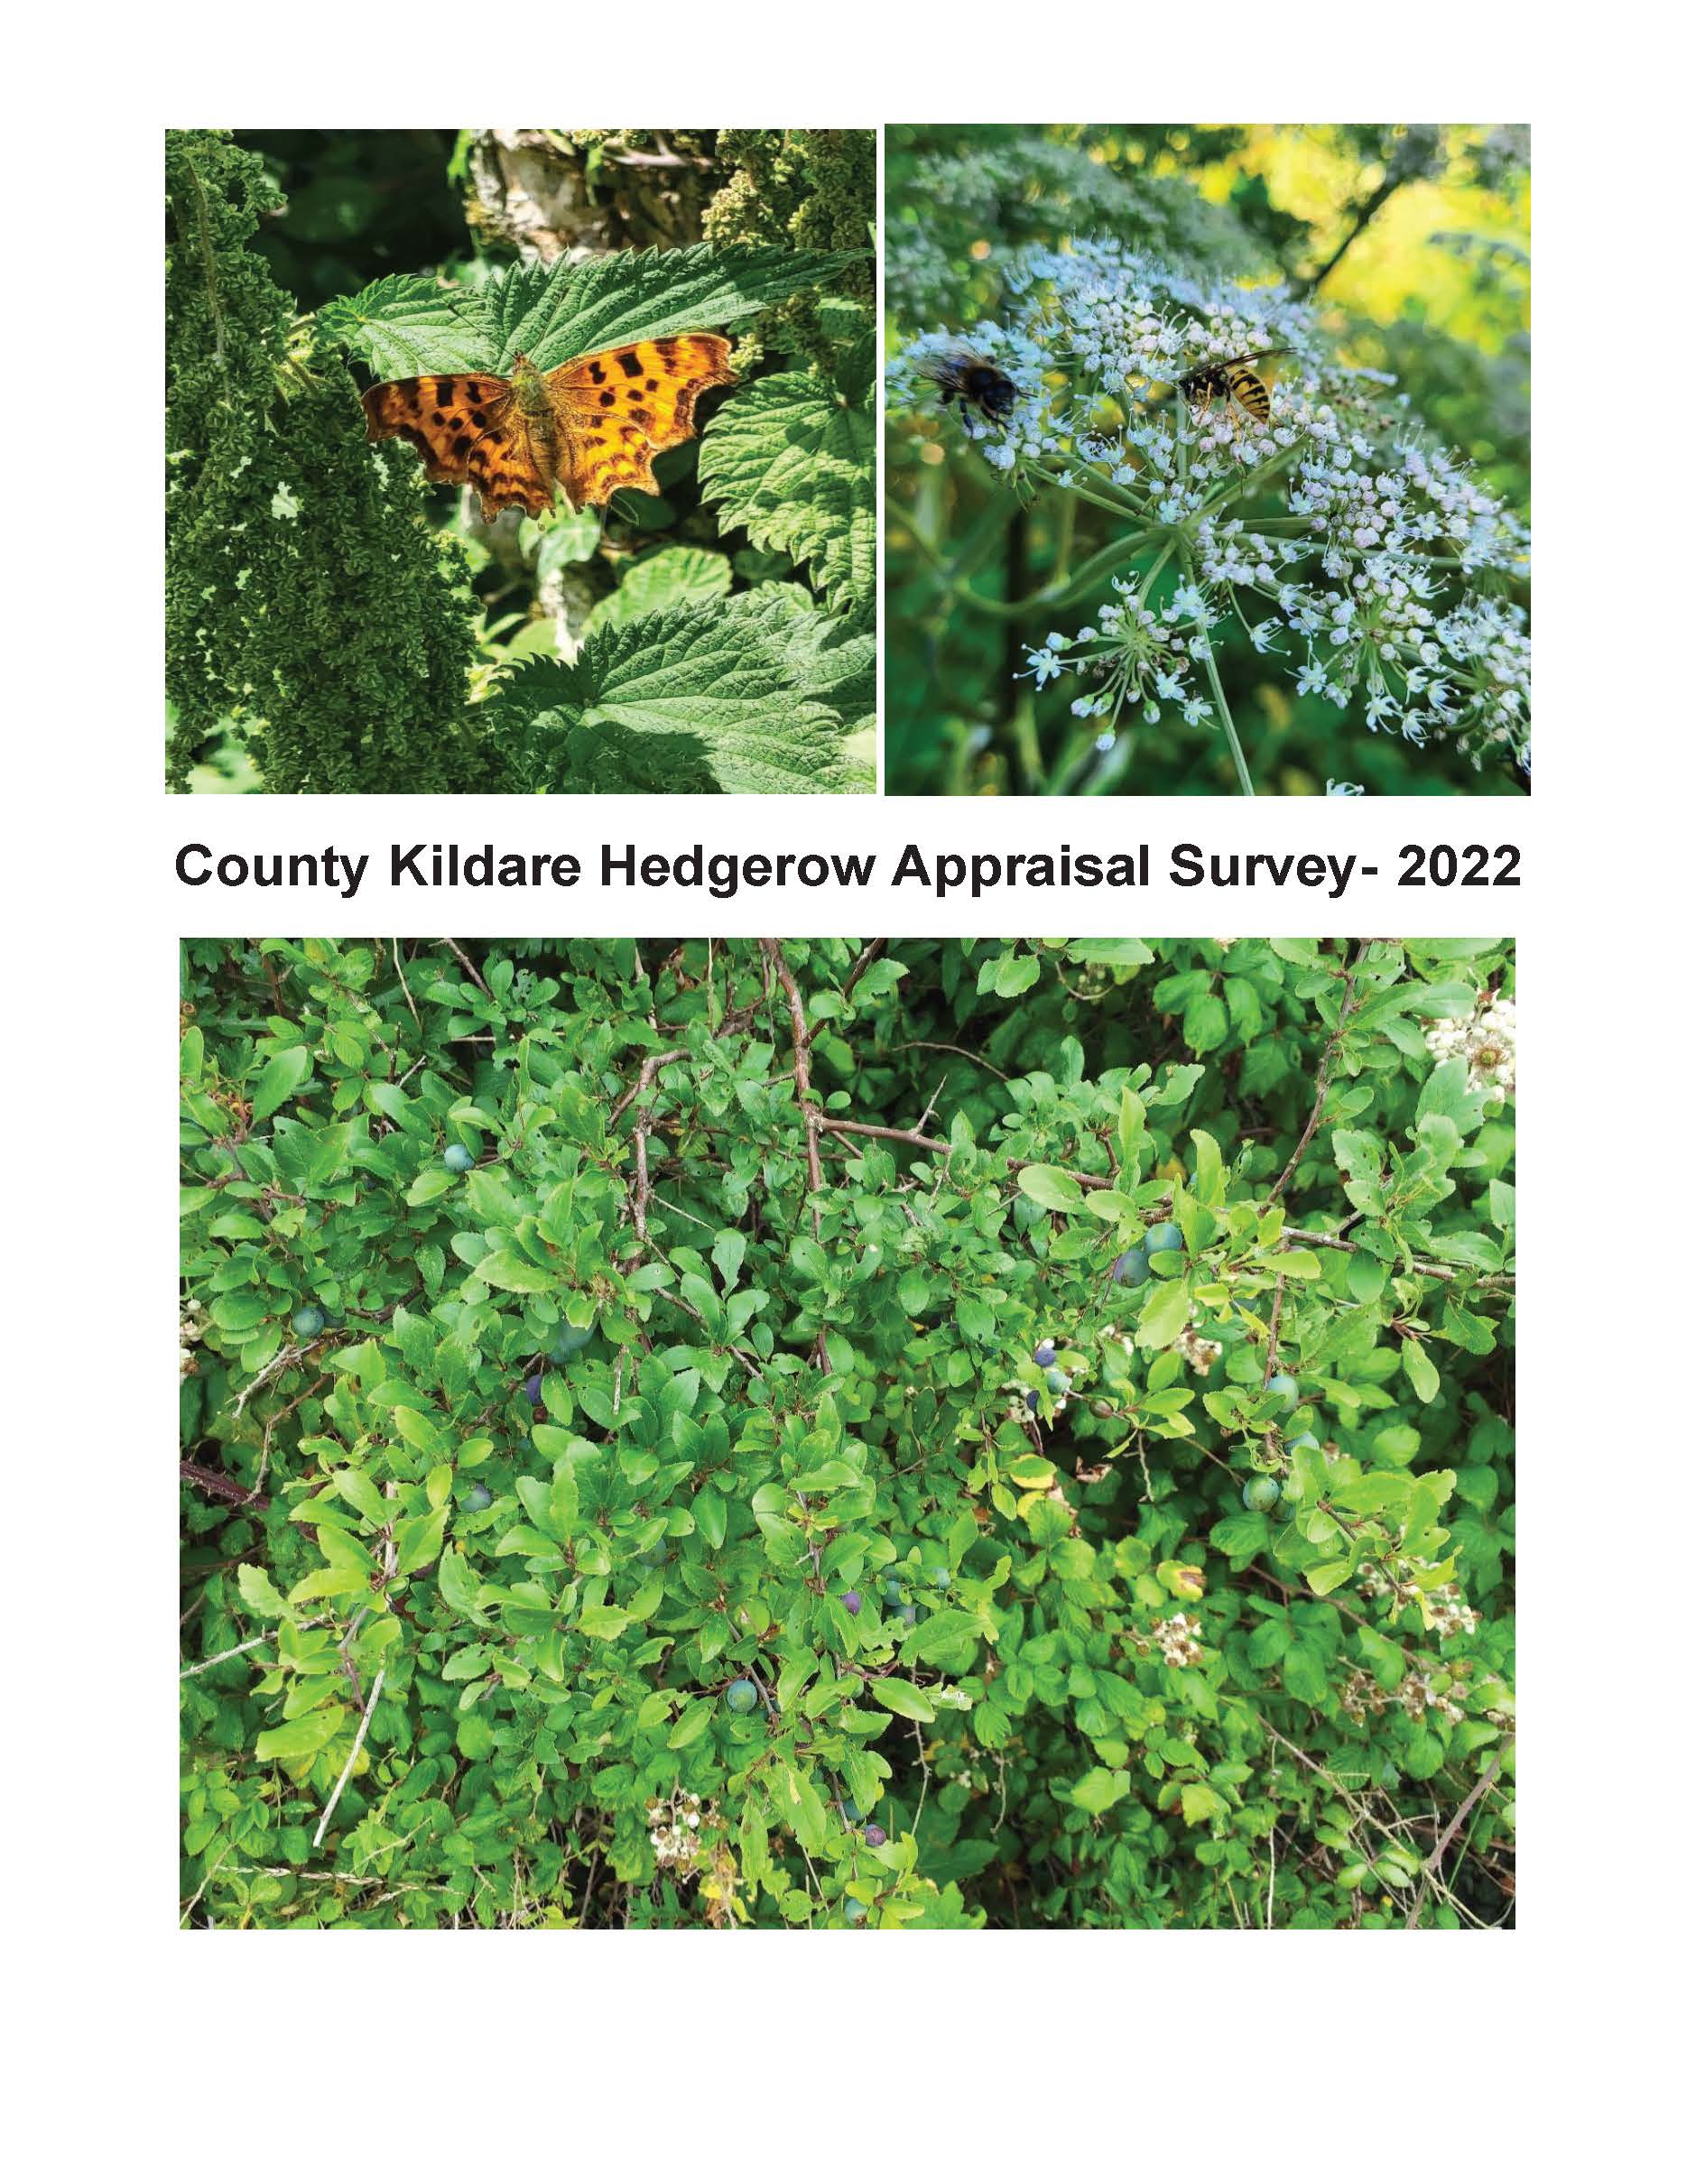 Image and link to County Kildare Hedgerow Appraisal Survey 2022